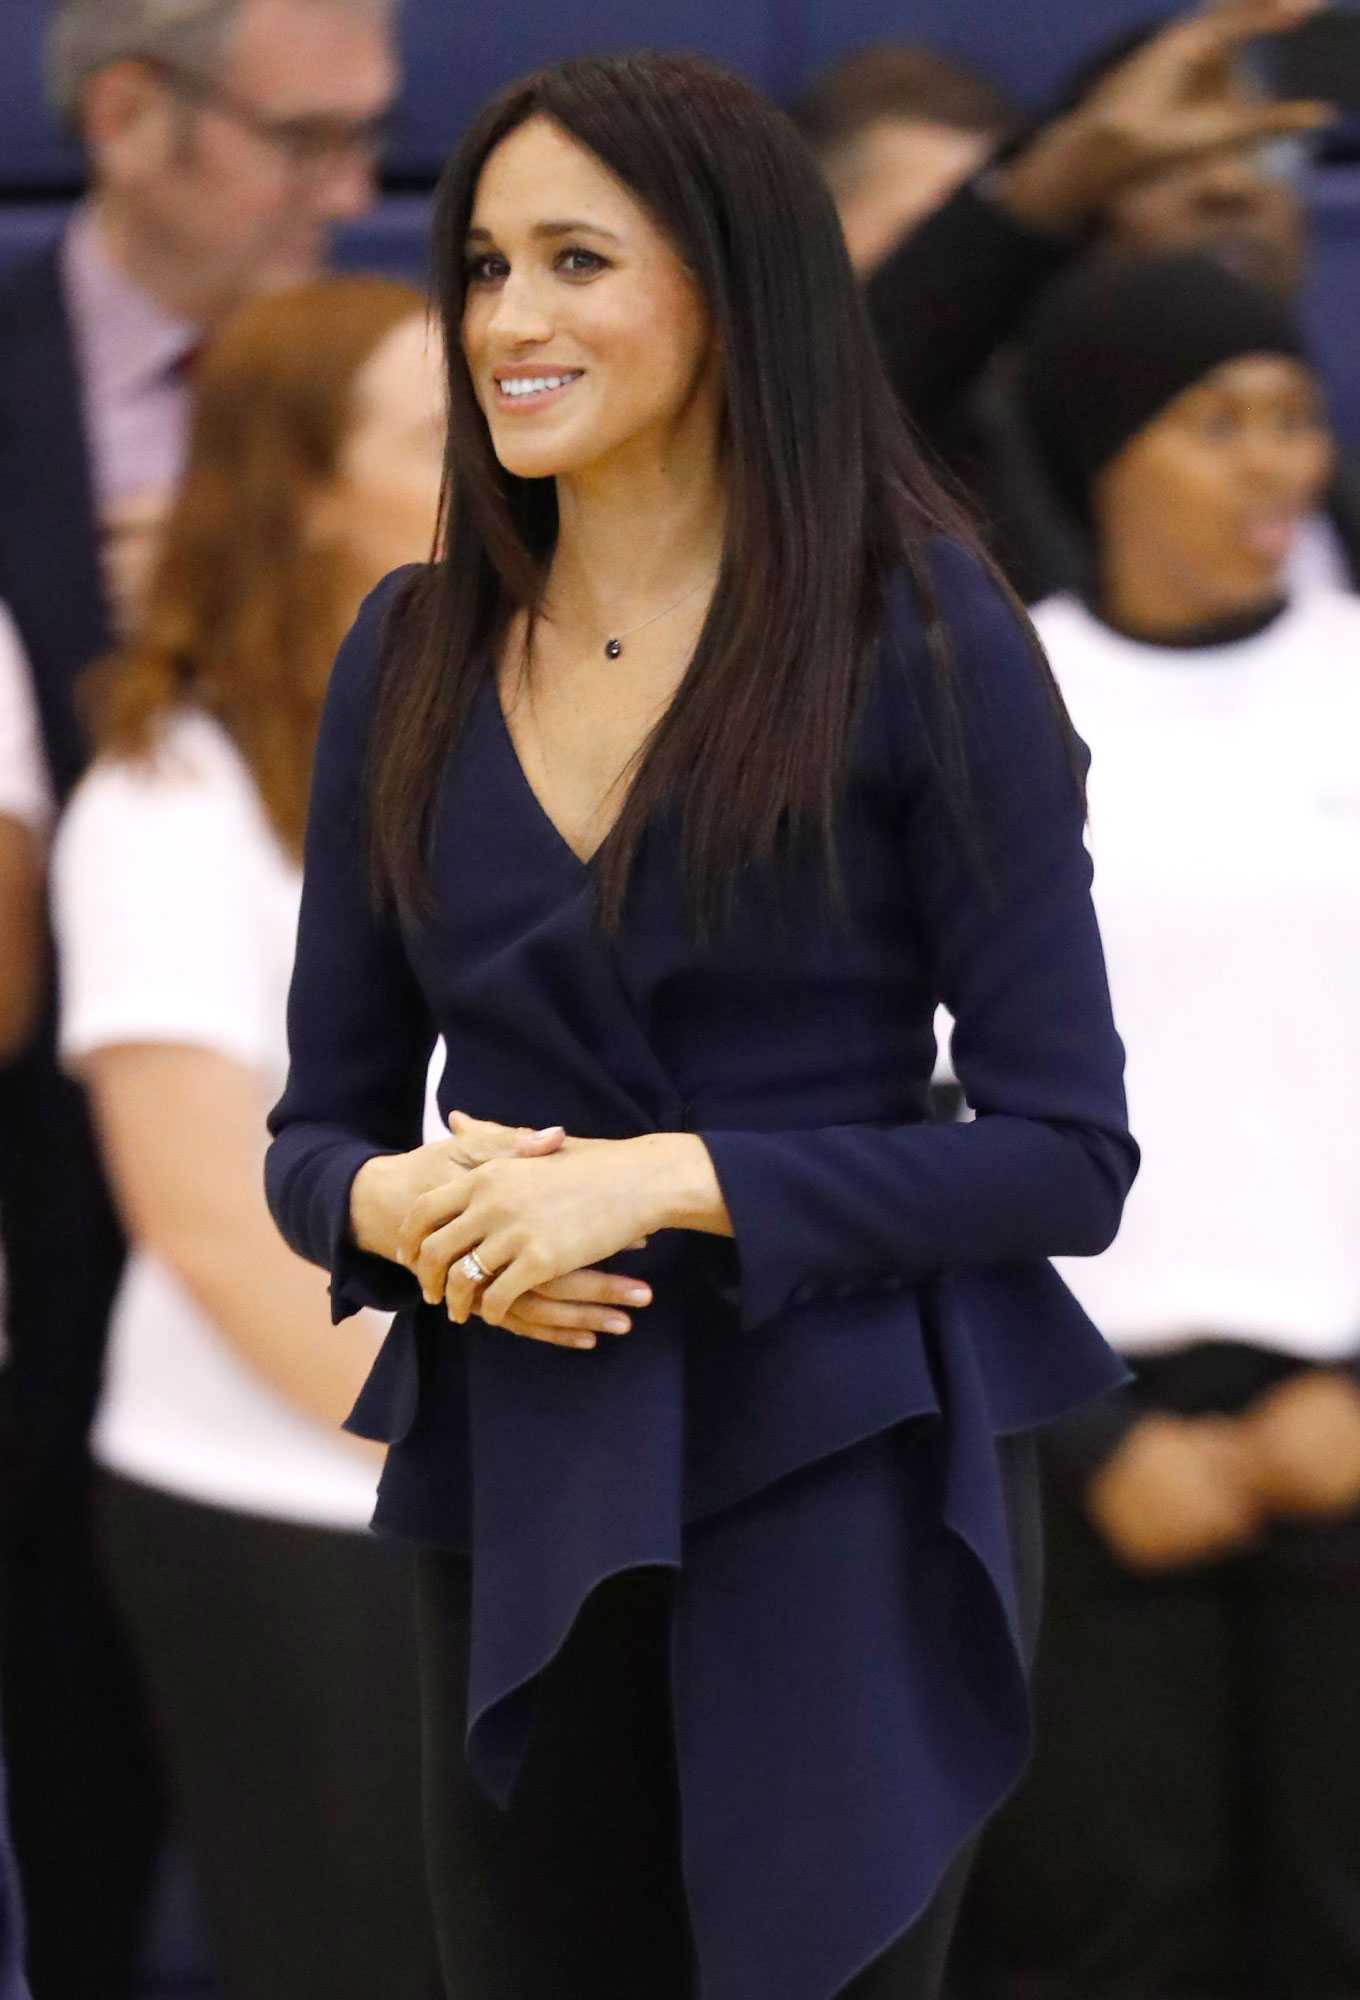 75+ Hot Pictures Of Meghan Markle Which Are Just Too Hot To Handle | Best Of Comic Books